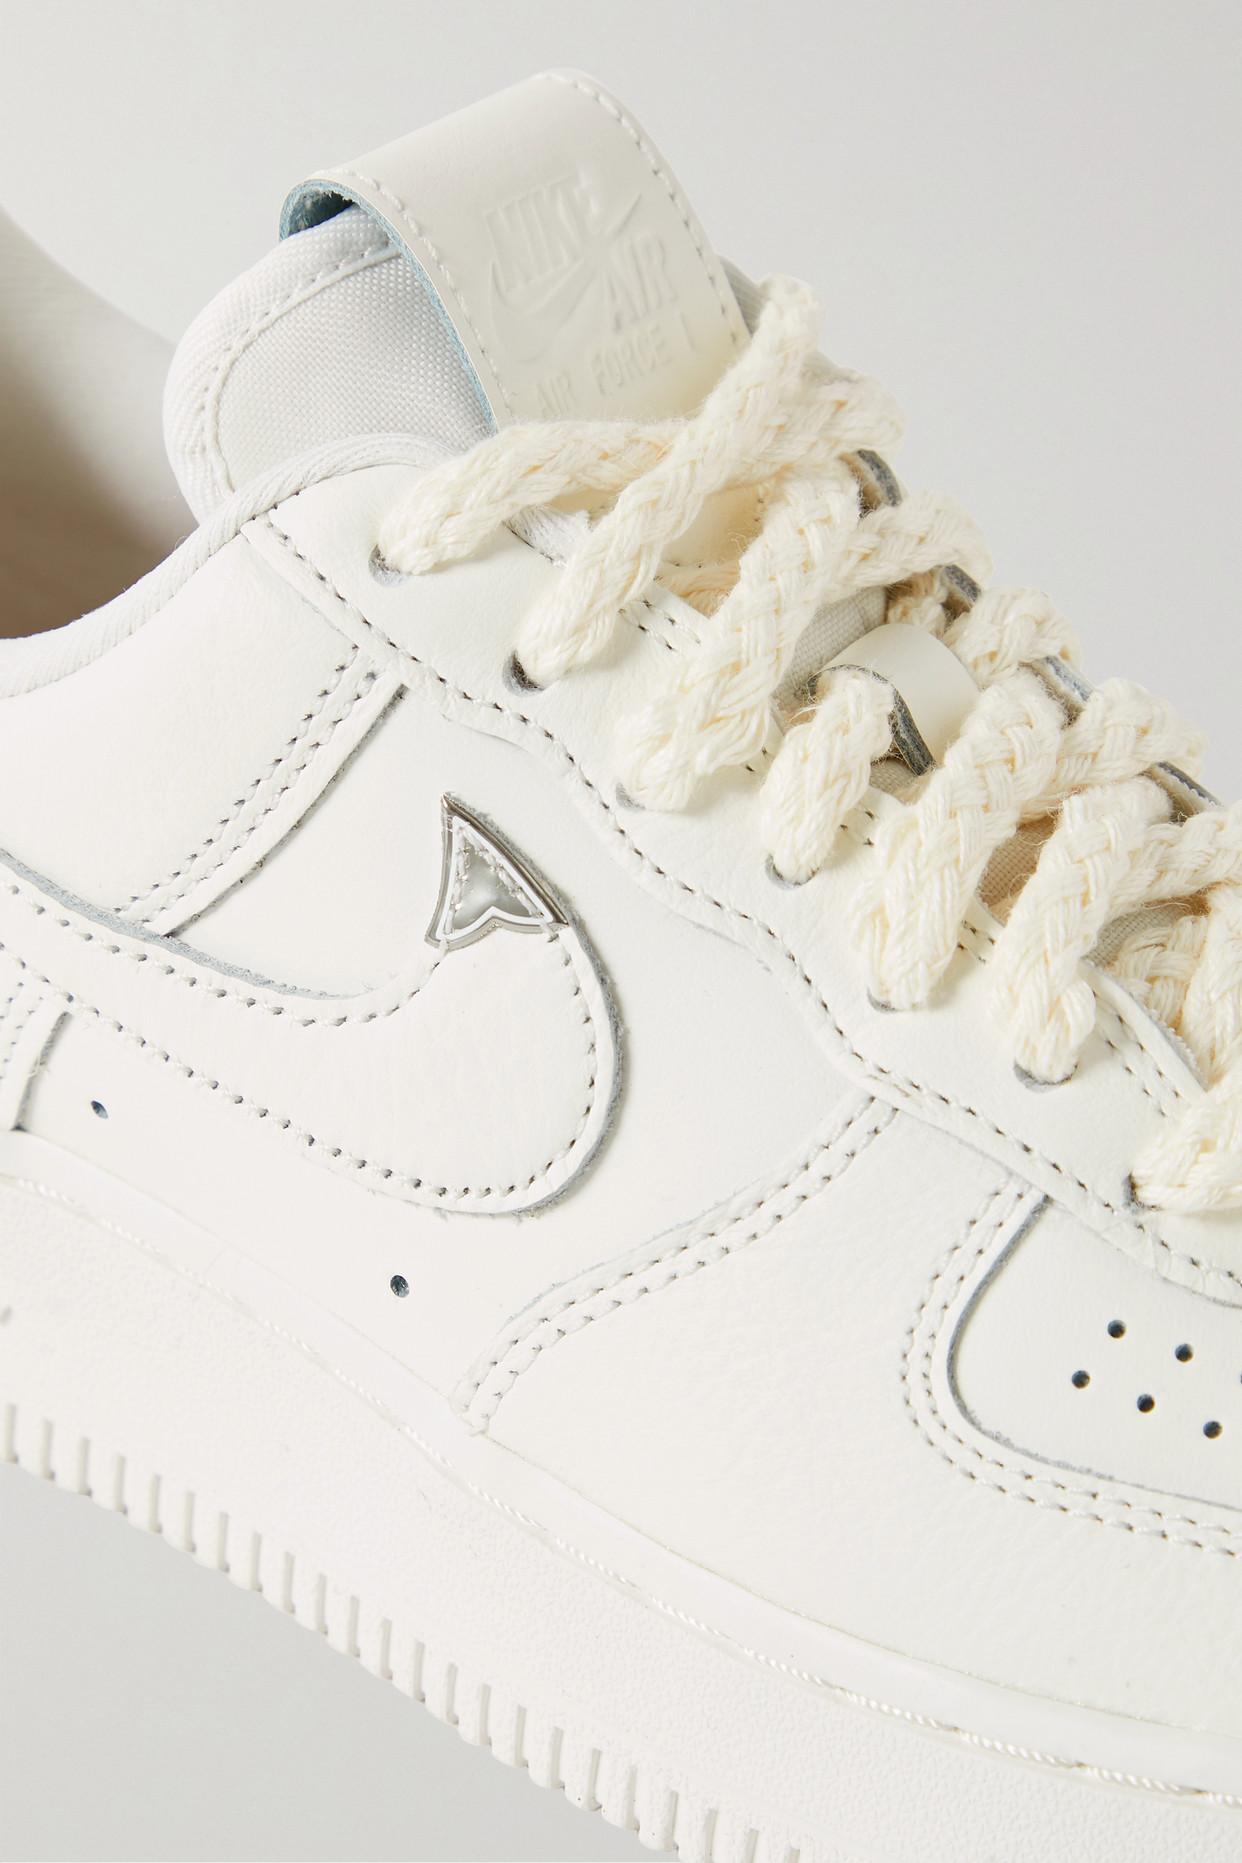 Nike Air Force 1 '07 Embellished Leather Sneakers in White | Lyst